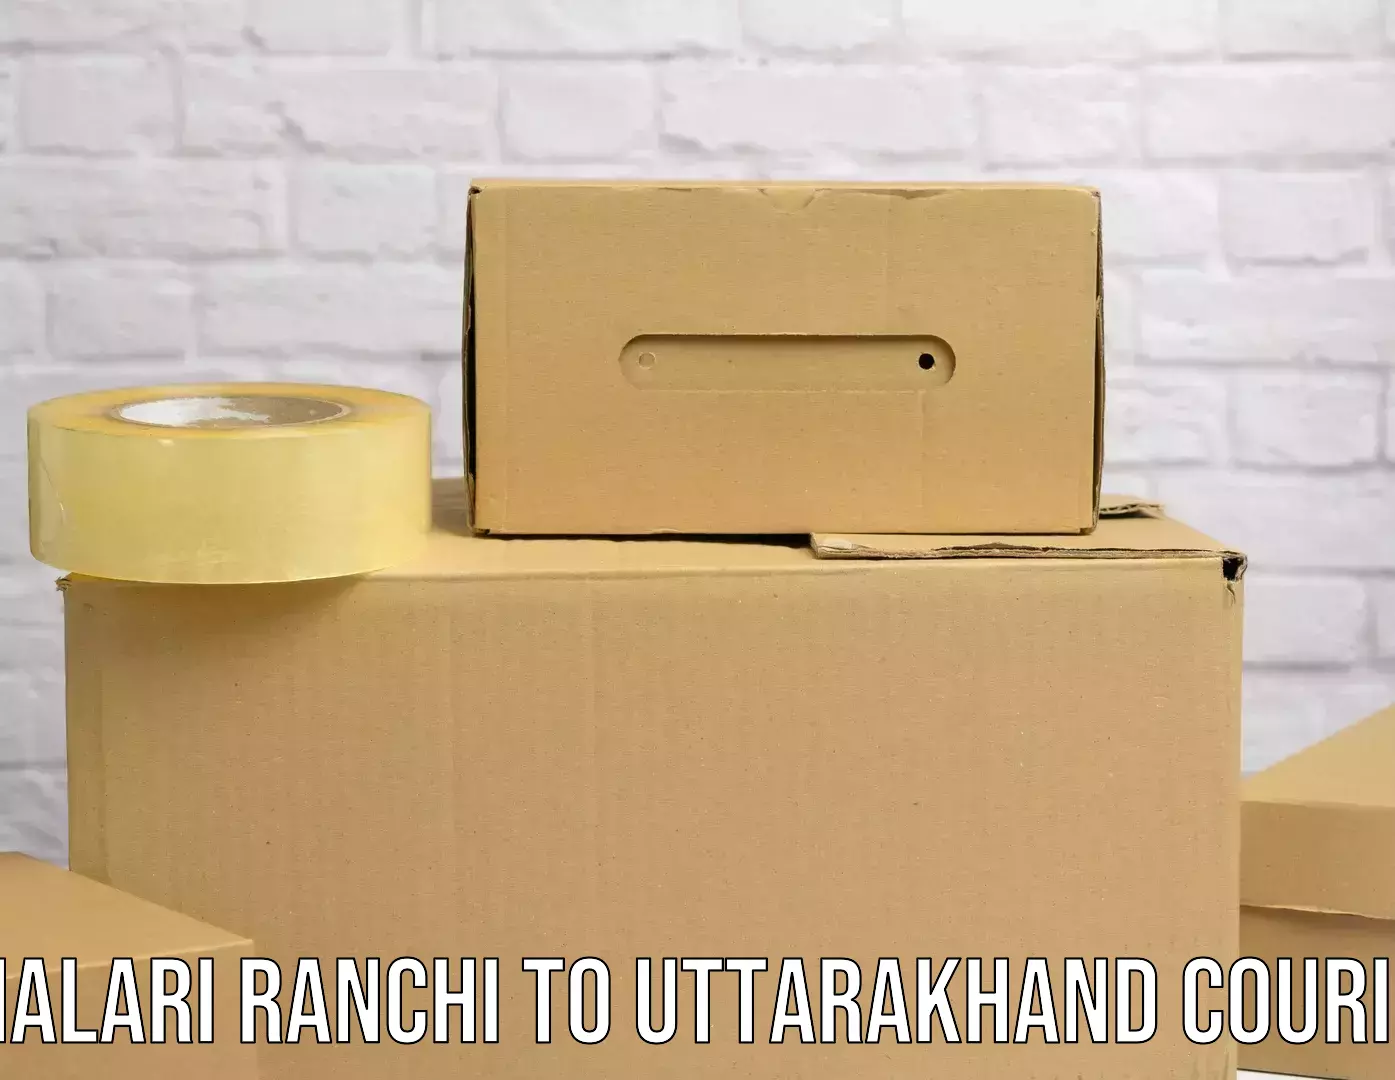 Reliable shipping partners Khalari Ranchi to Mussoorie